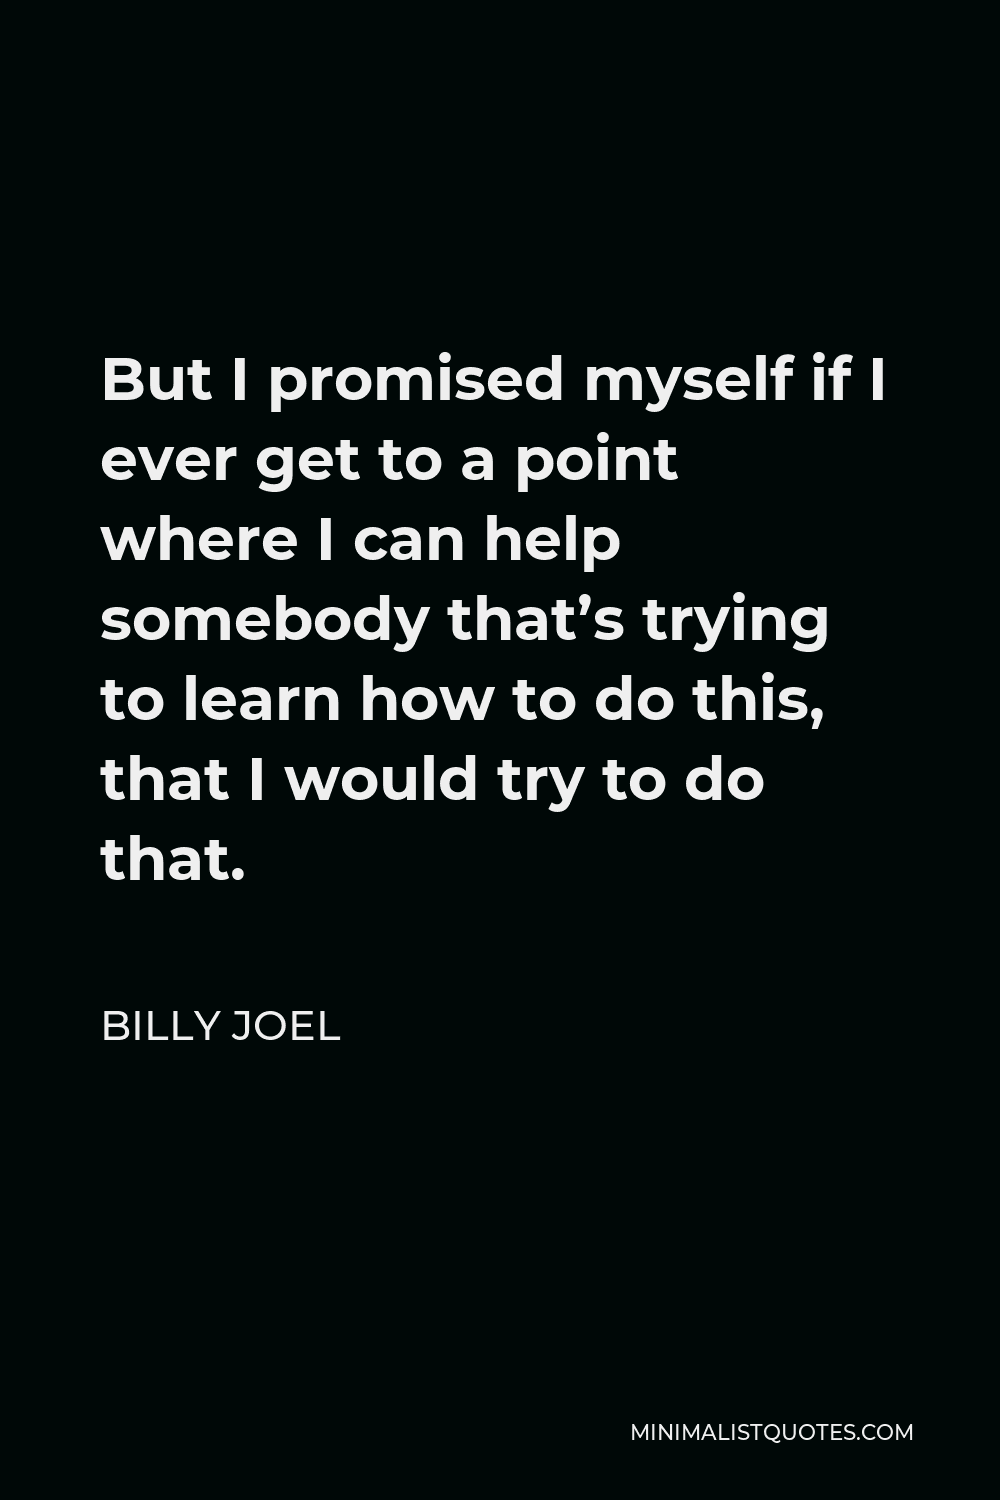 Billy Joel Quote - But I promised myself if I ever get to a point where I can help somebody that’s trying to learn how to do this, that I would try to do that.